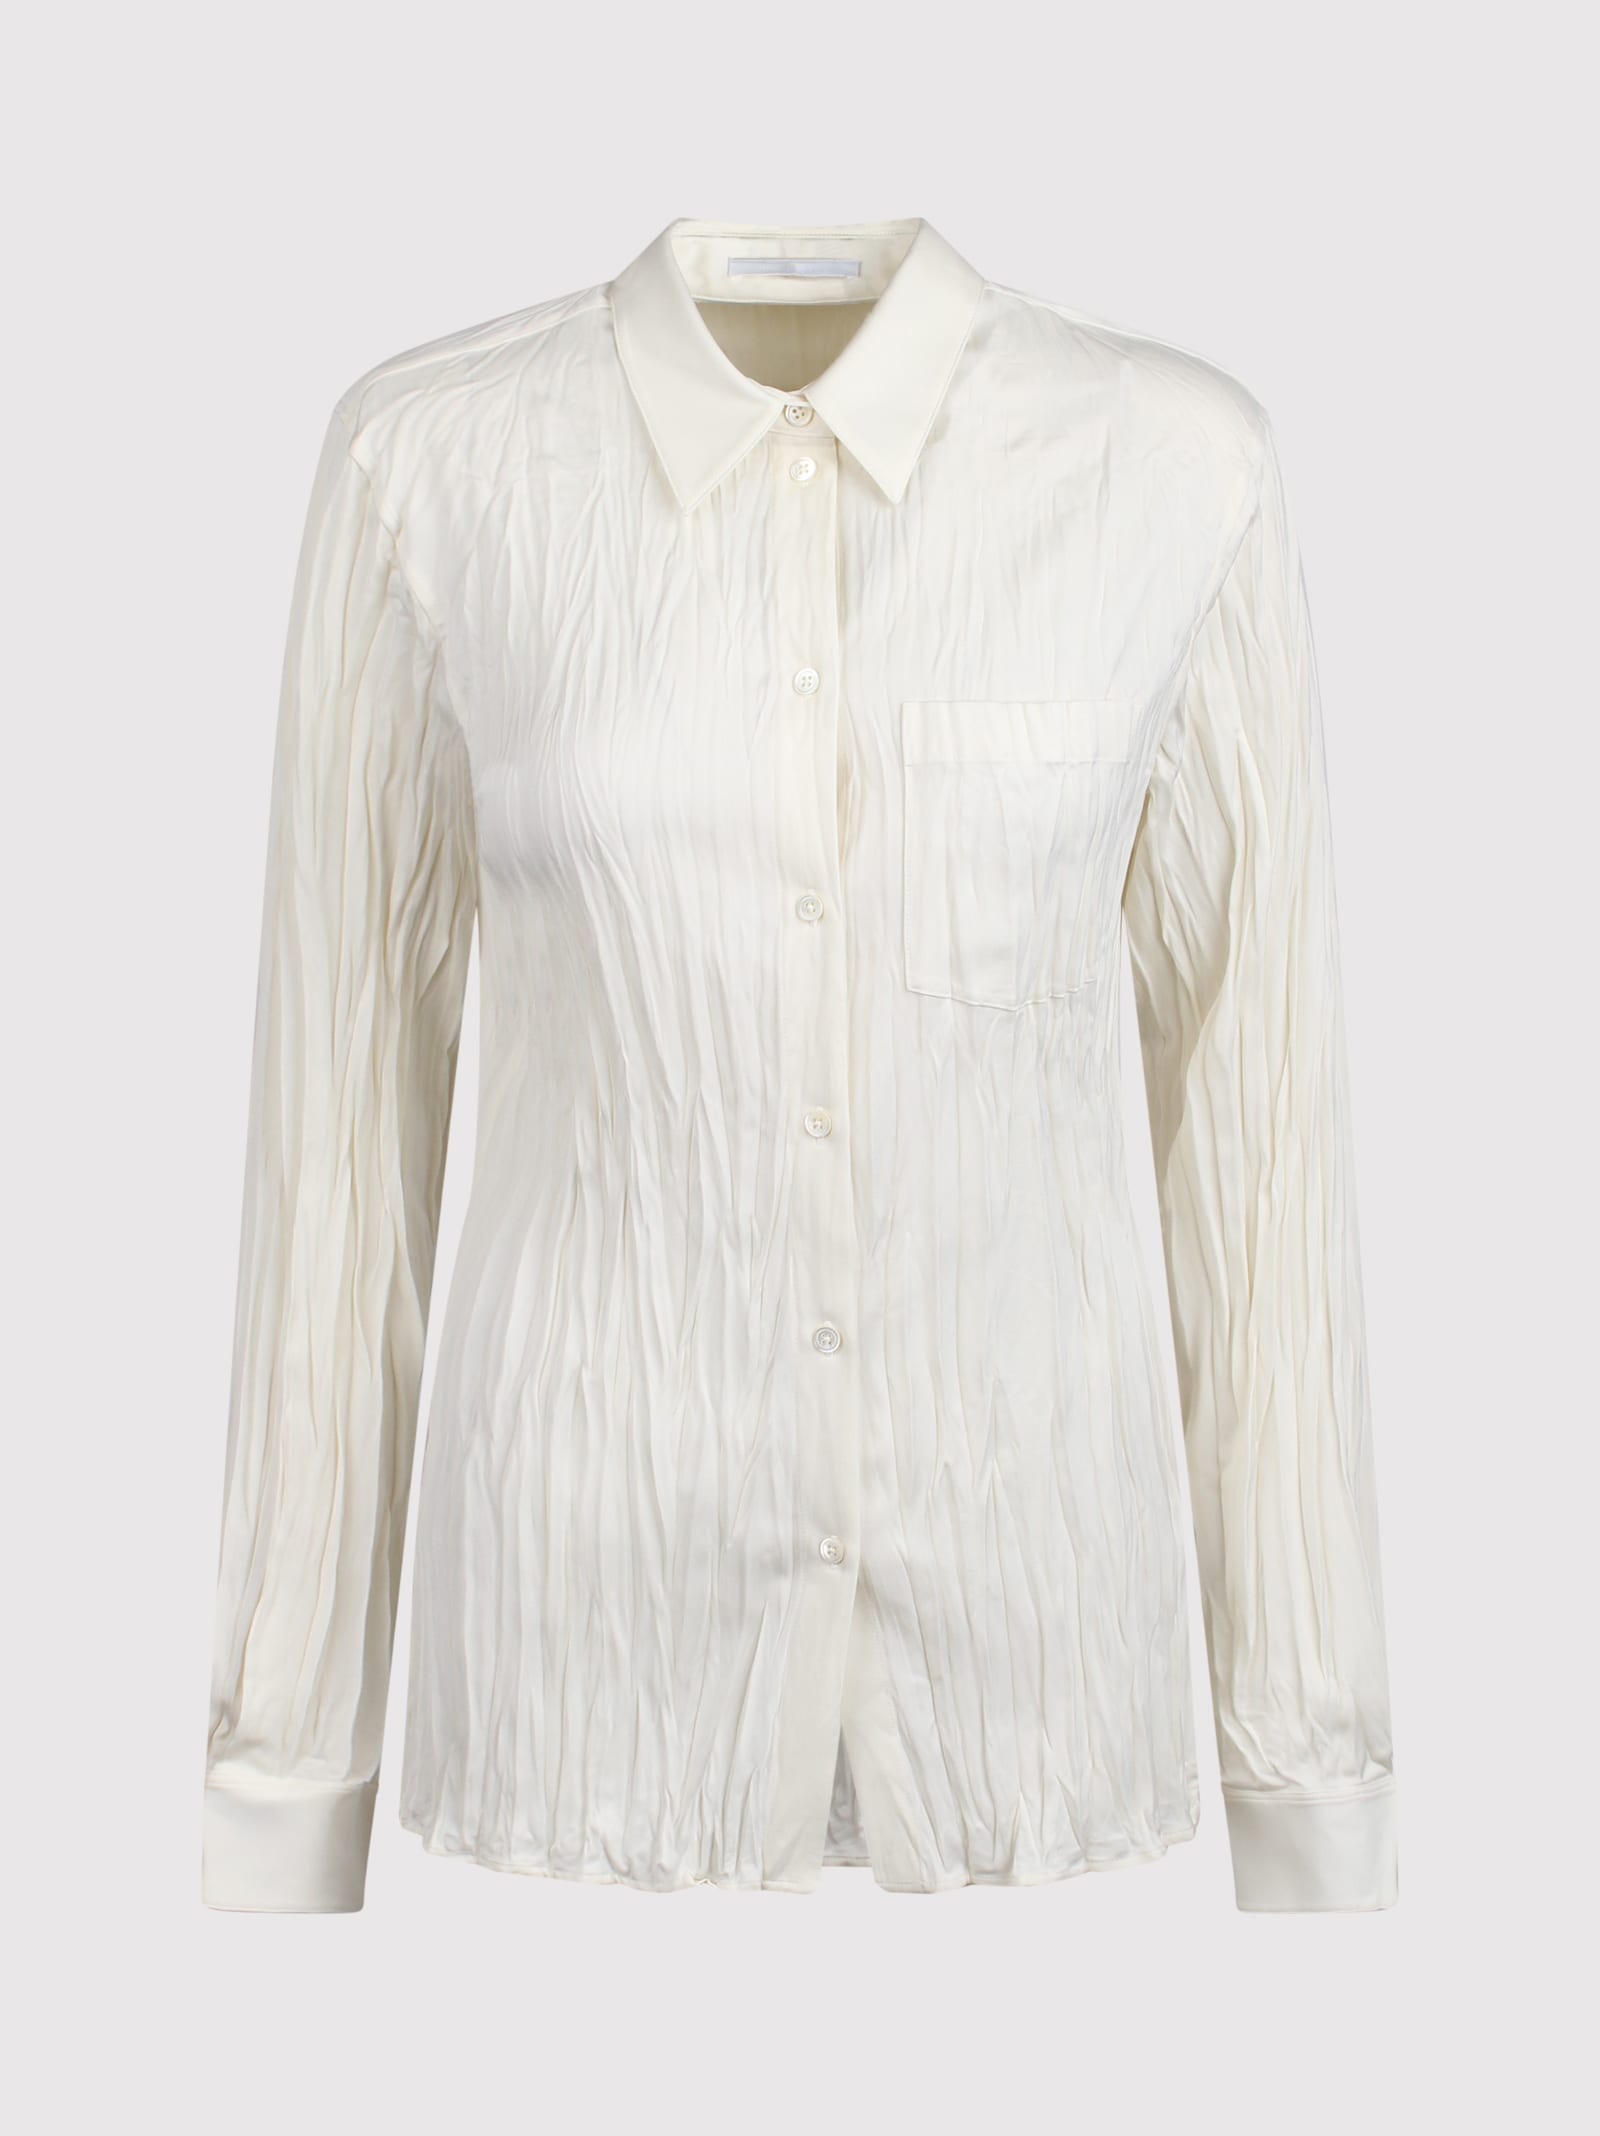 Helmut Lang Classic Wrinkled Effect Shirt In Beige